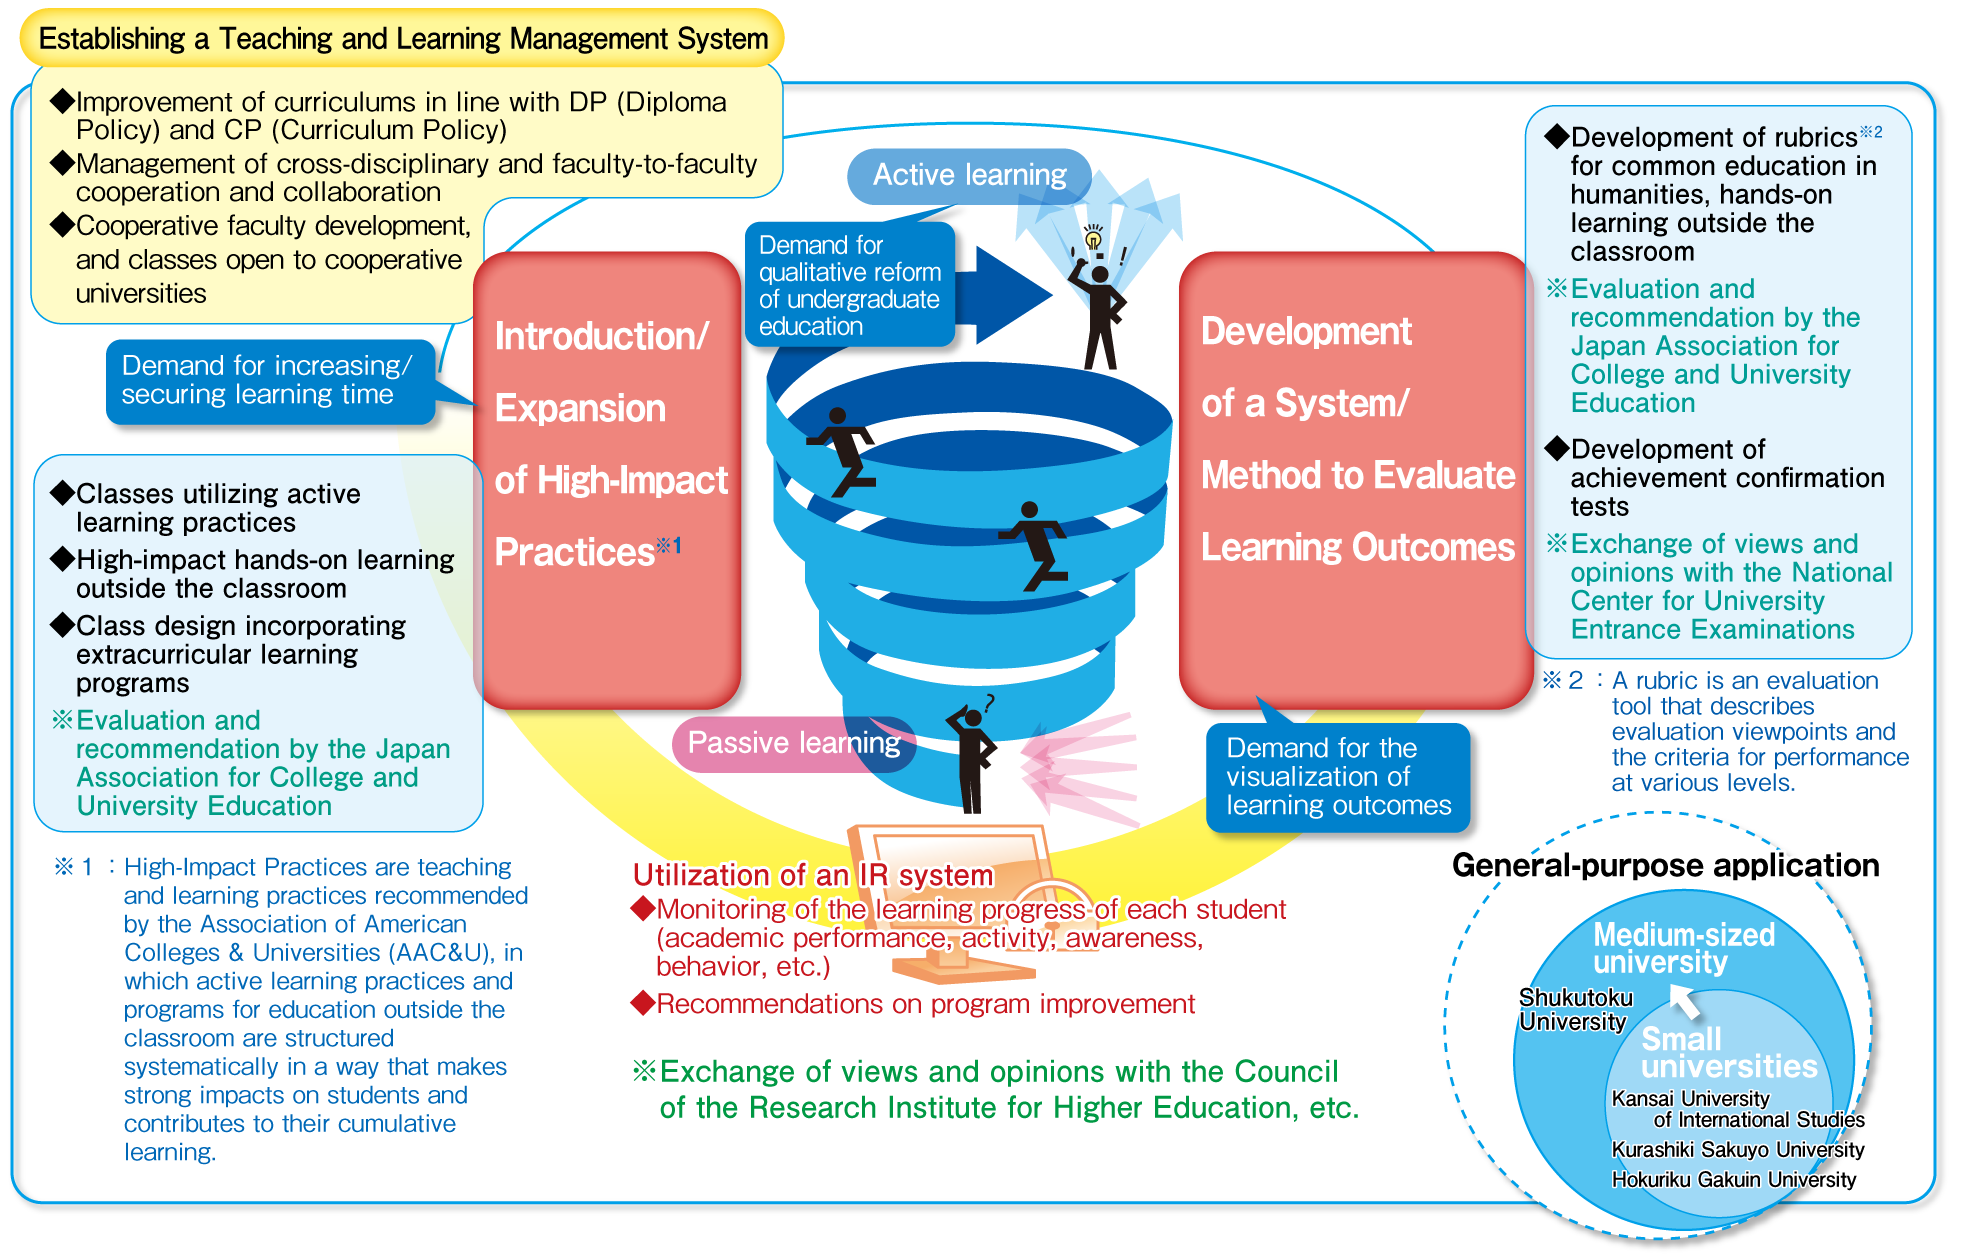 Establishing a teaching and learning management system